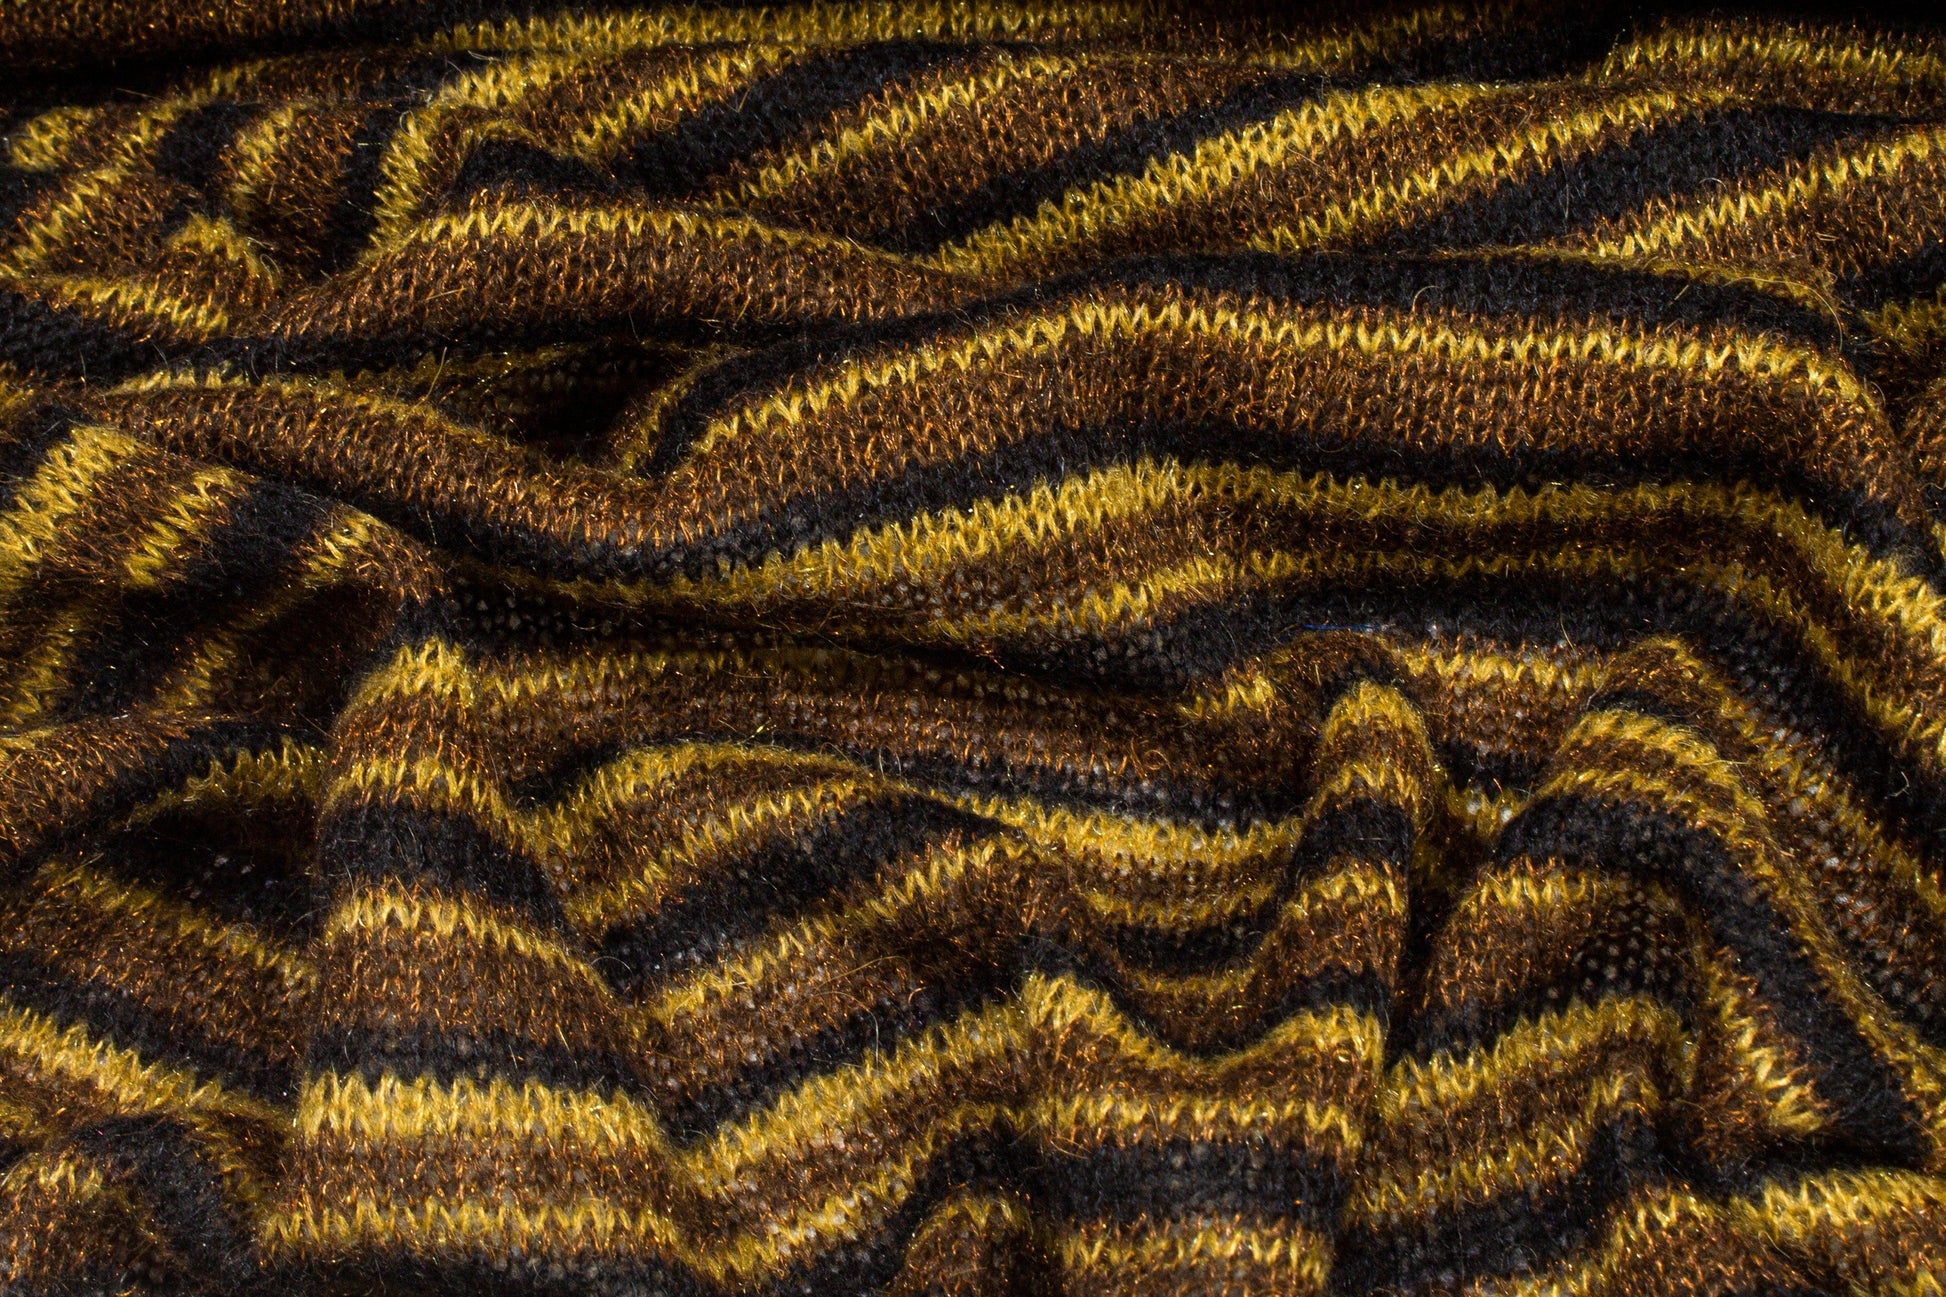 Brown and Black Striped Poly Wool Jersey Knit - Prime Fabrics